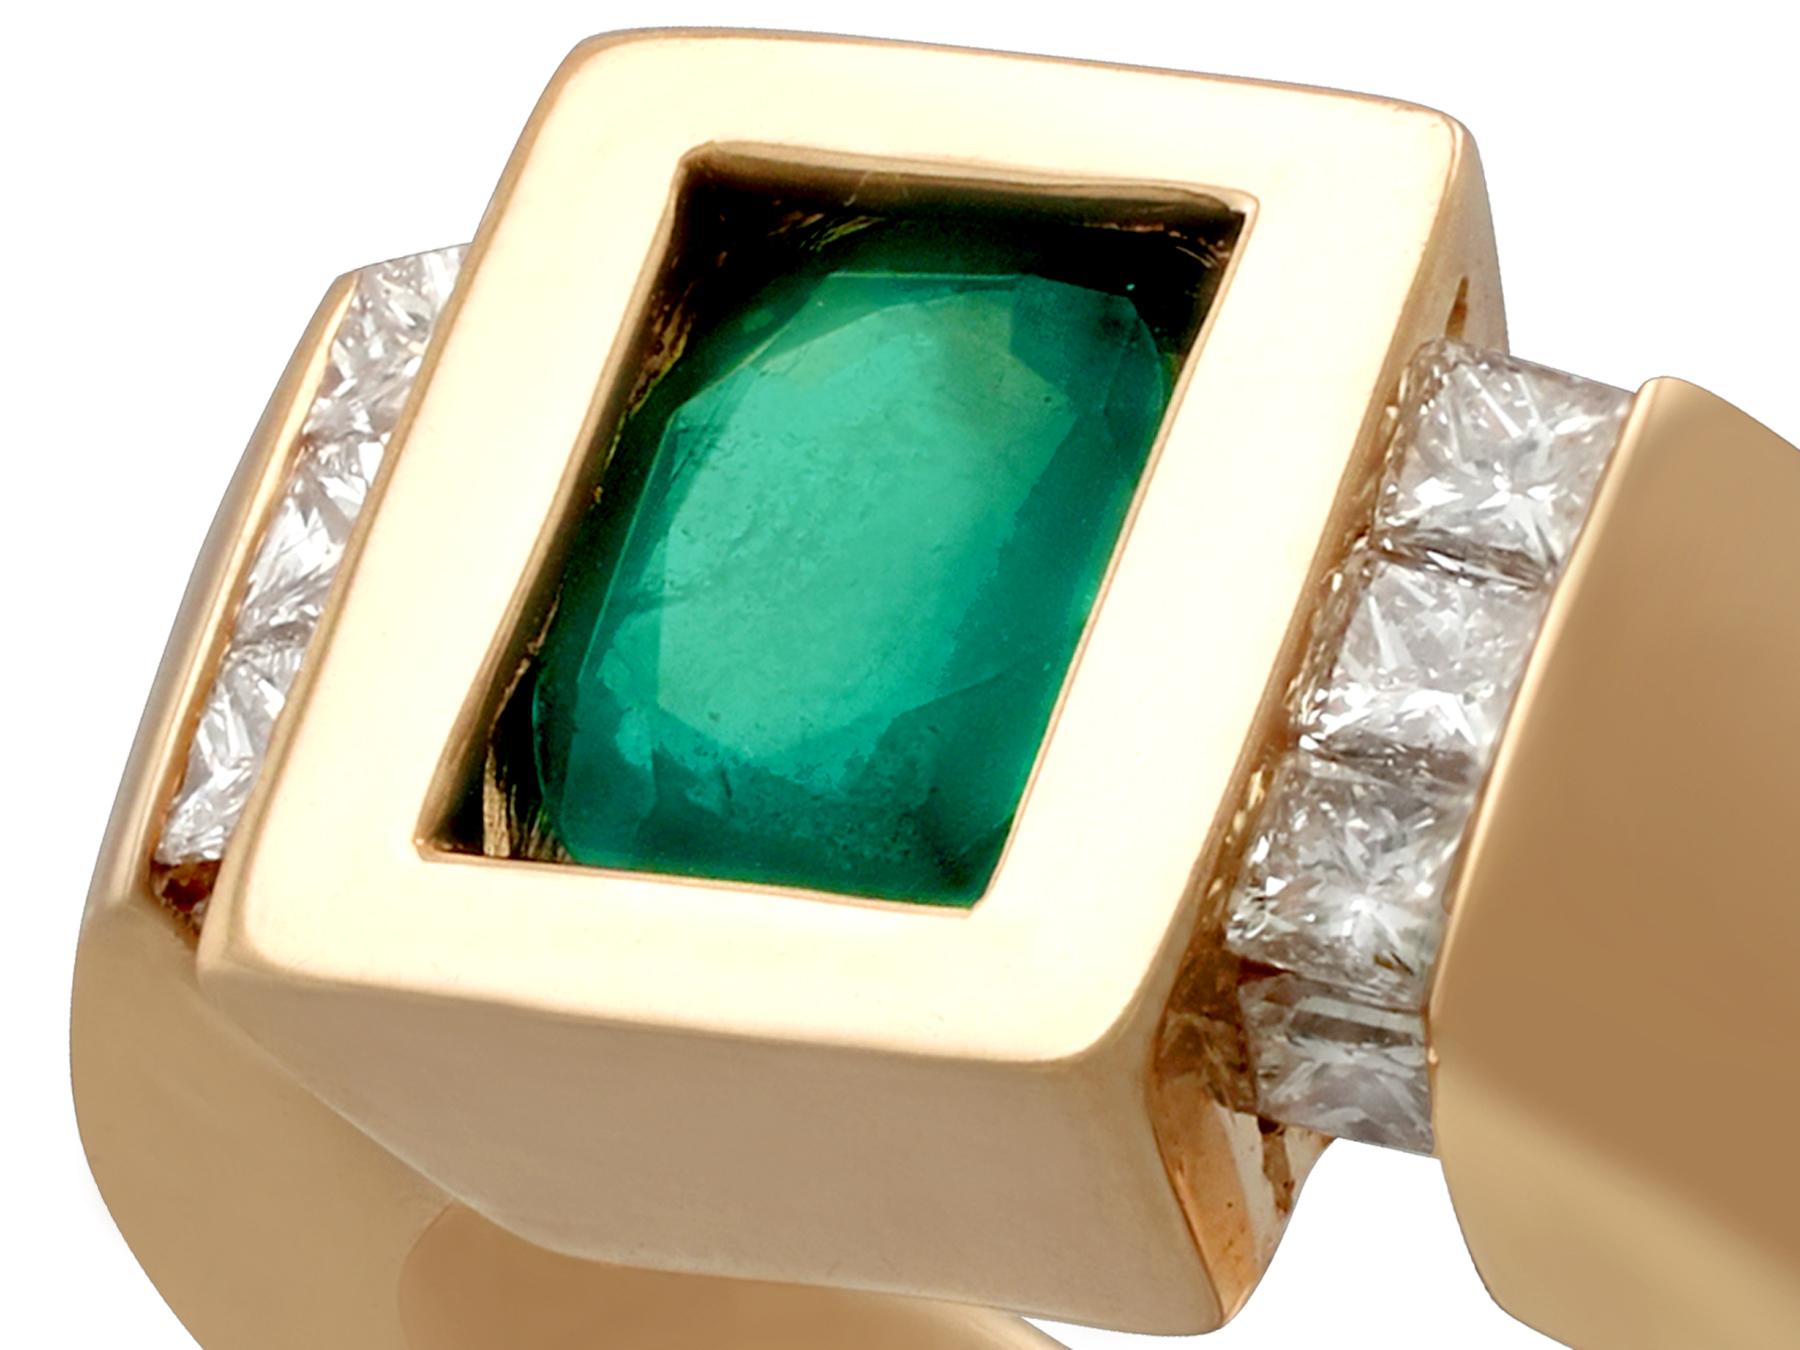 This large and impressive vintage French emerald and diamond ring has been crafted in 18k yellow gold.

The ring displays a central 1.29 carat oval cut emerald held within the substantial plain, polished, rectangular setting.

This vintage emerald